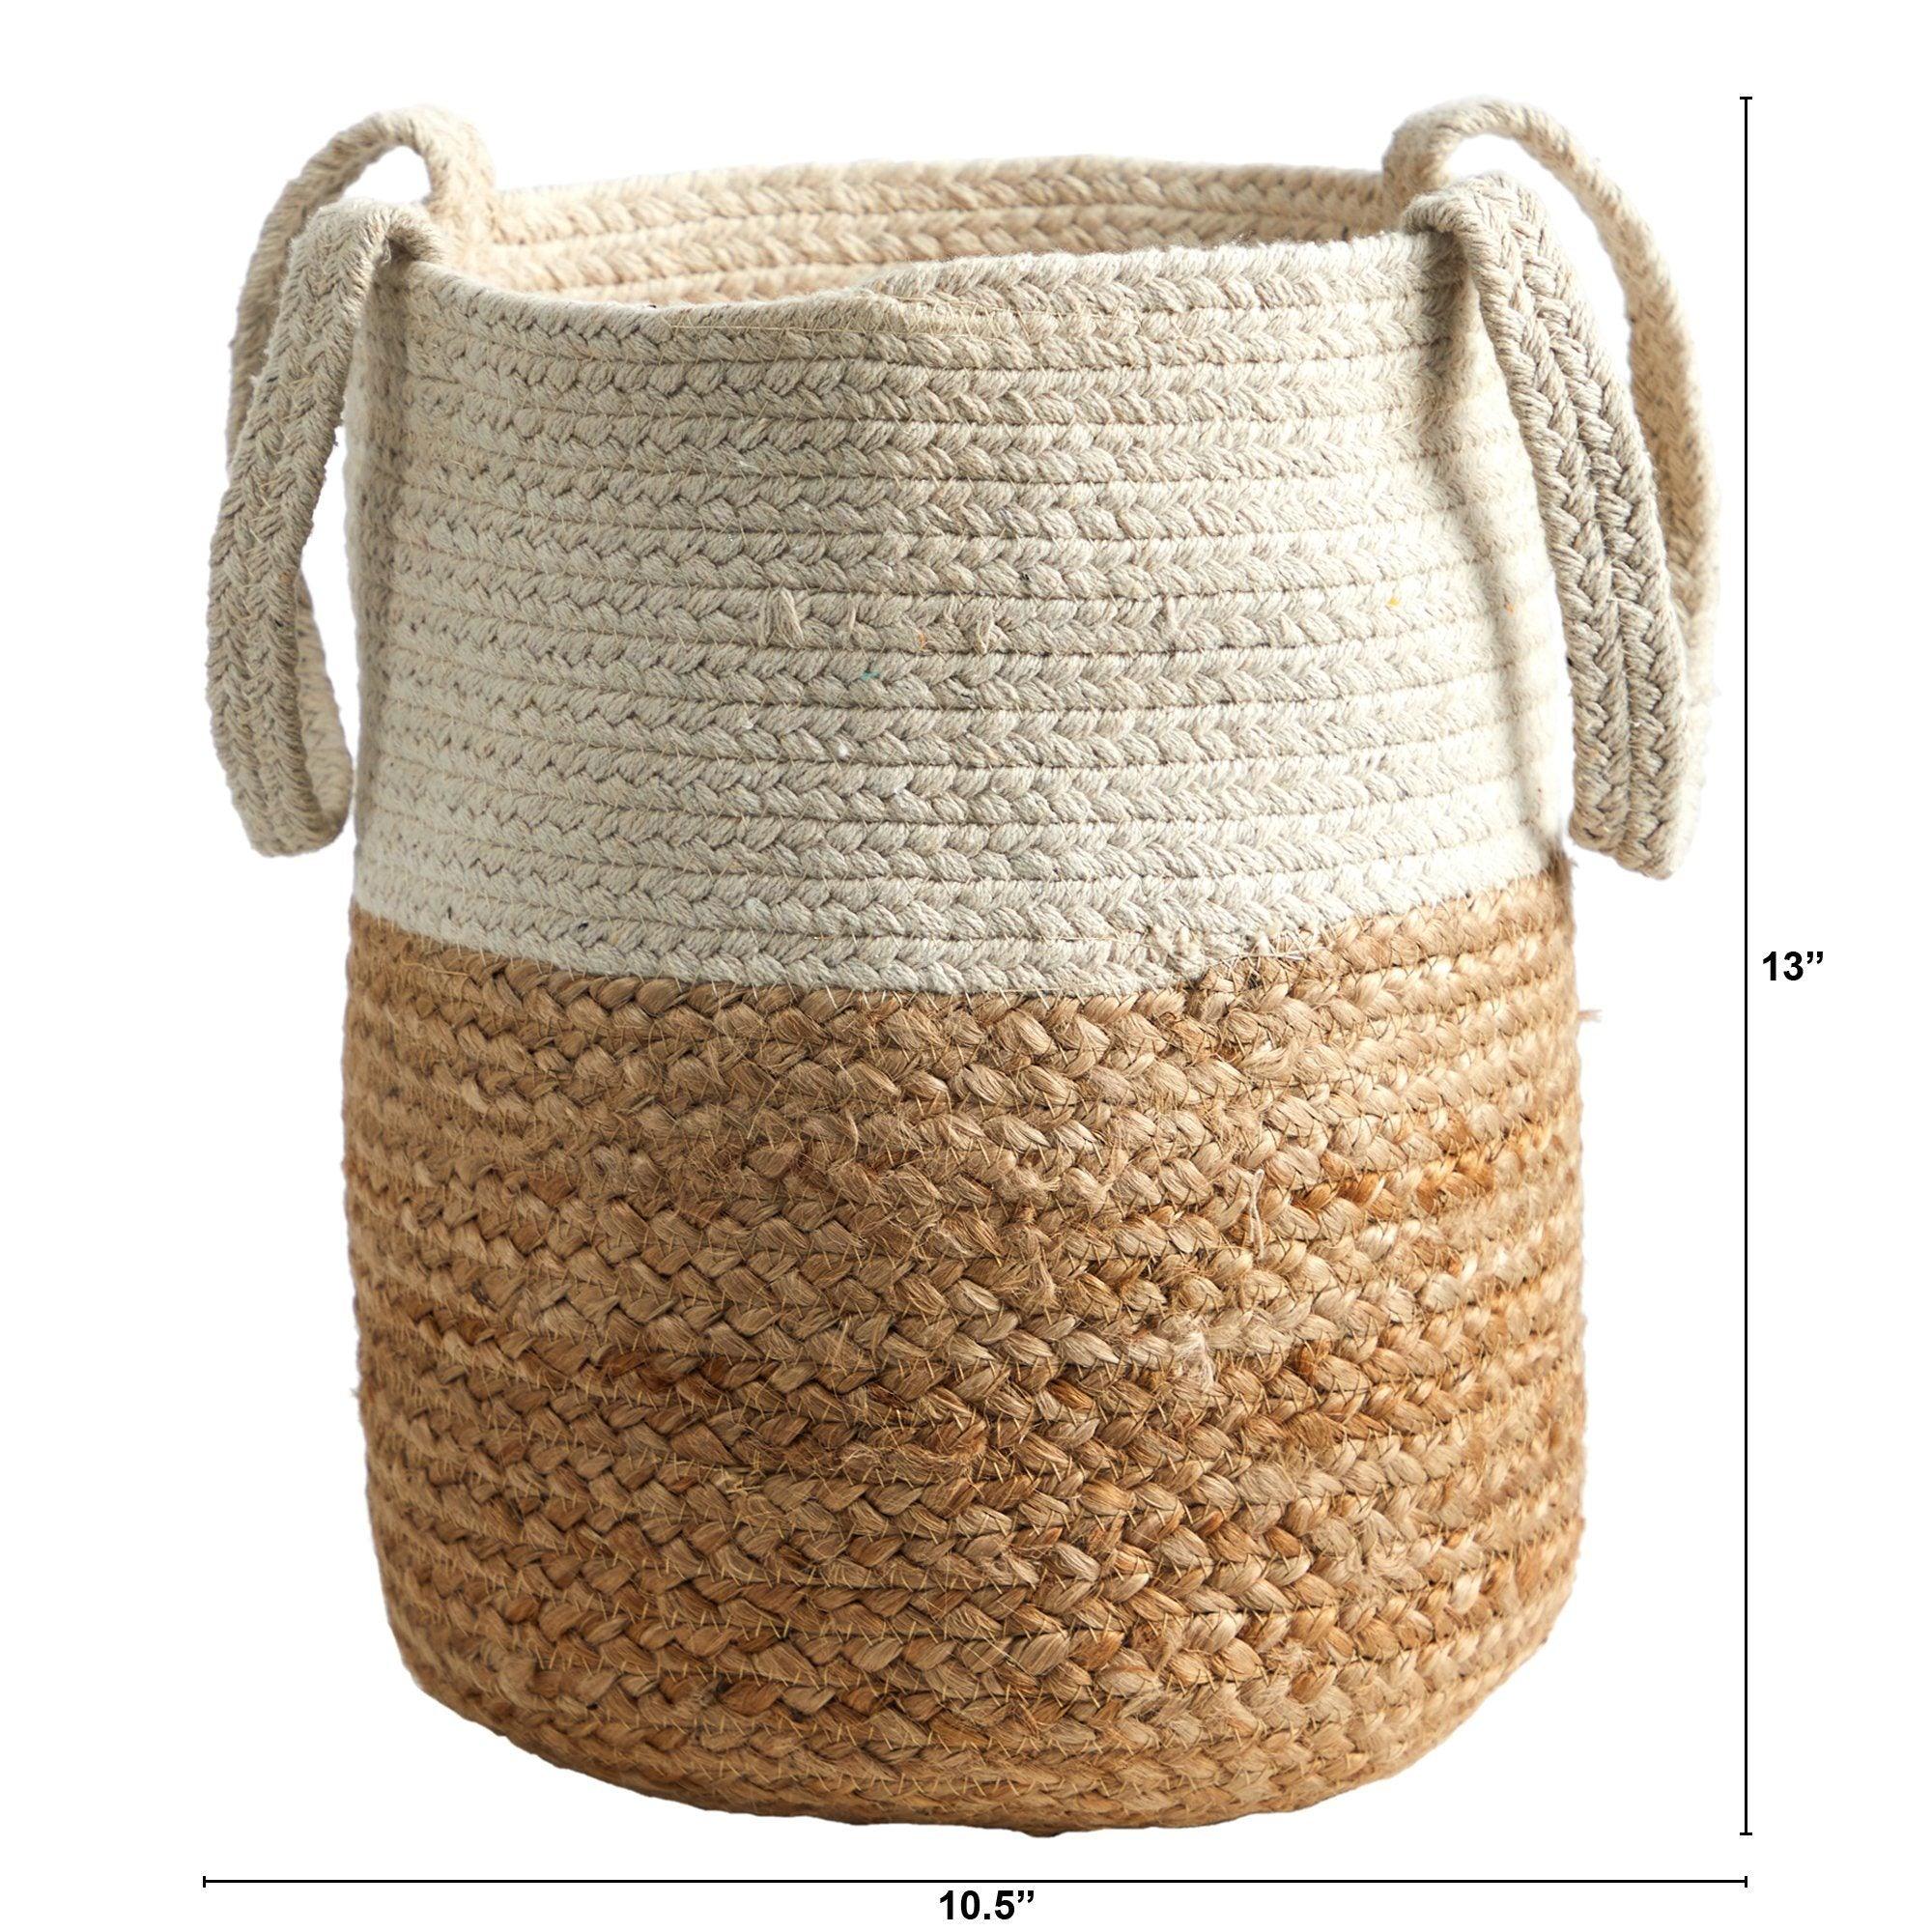 12.5” Handmade Natural Jute and Cotton Planter by Nearly Natural - Vysn